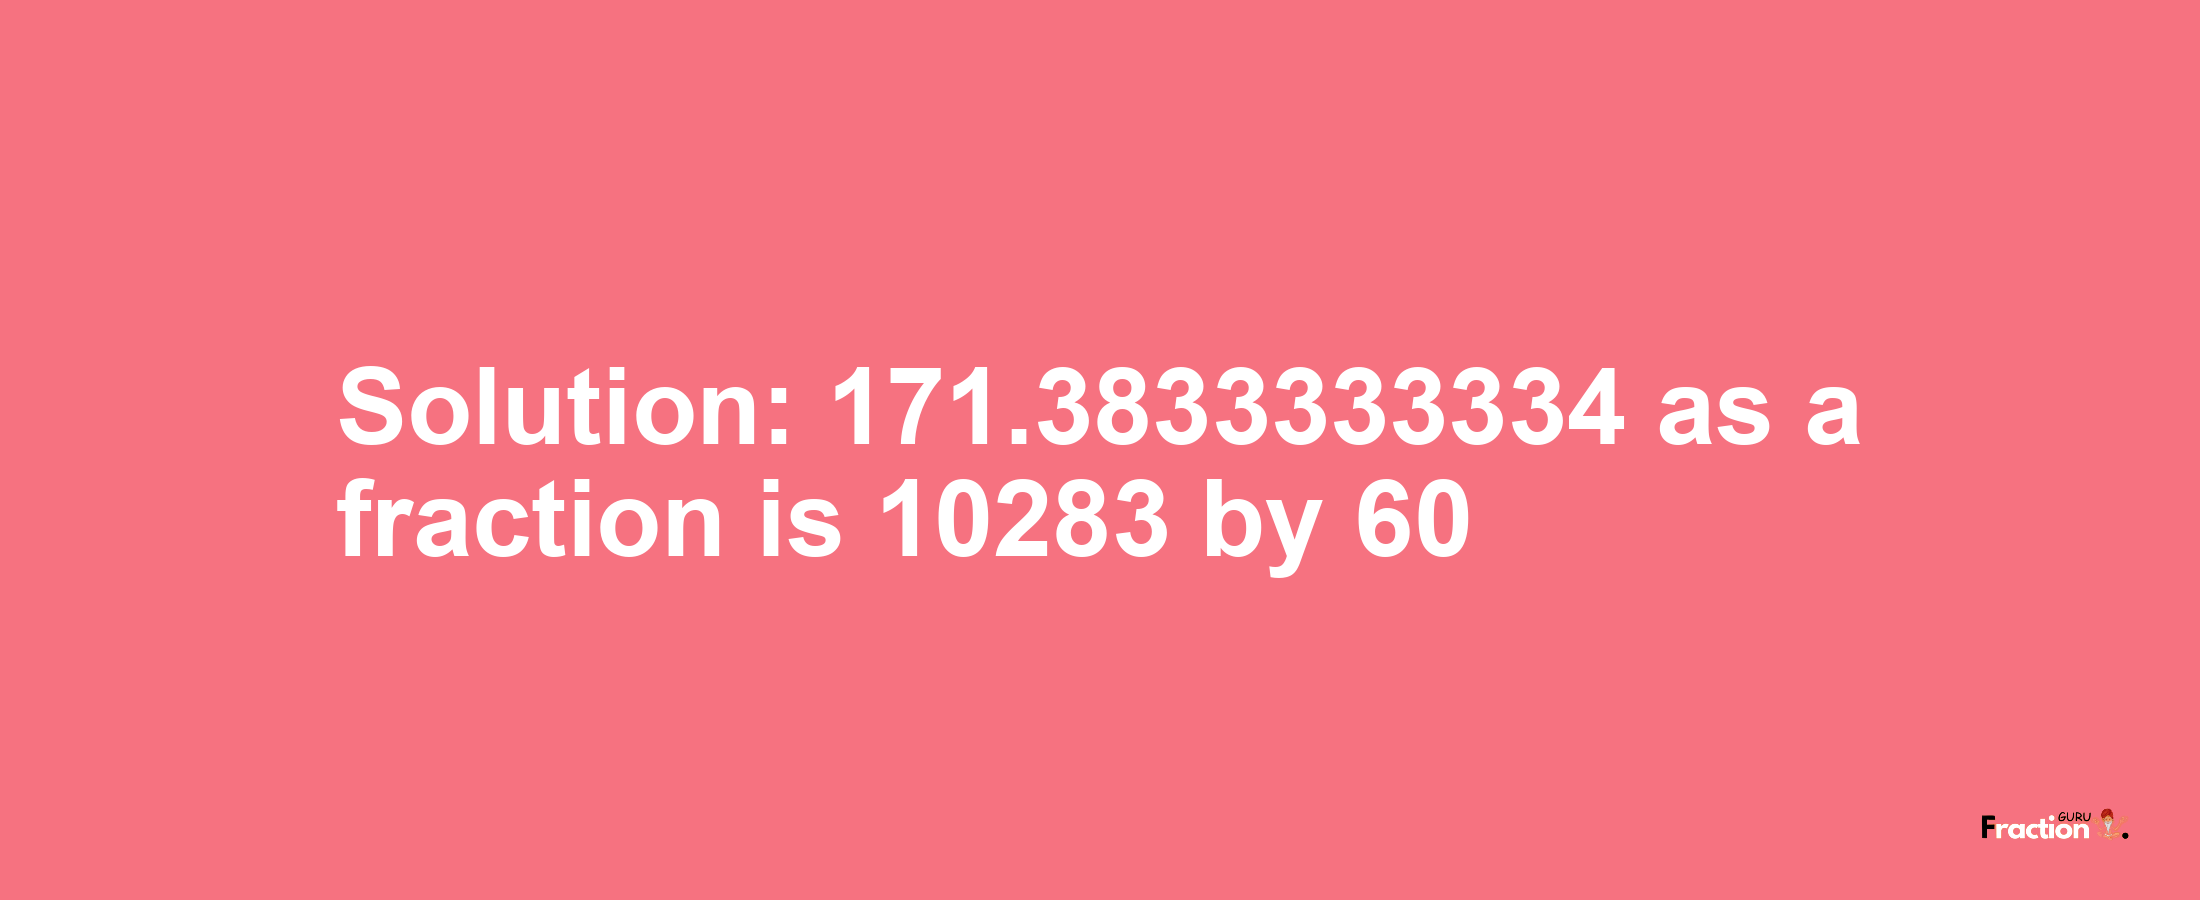 Solution:171.3833333334 as a fraction is 10283/60